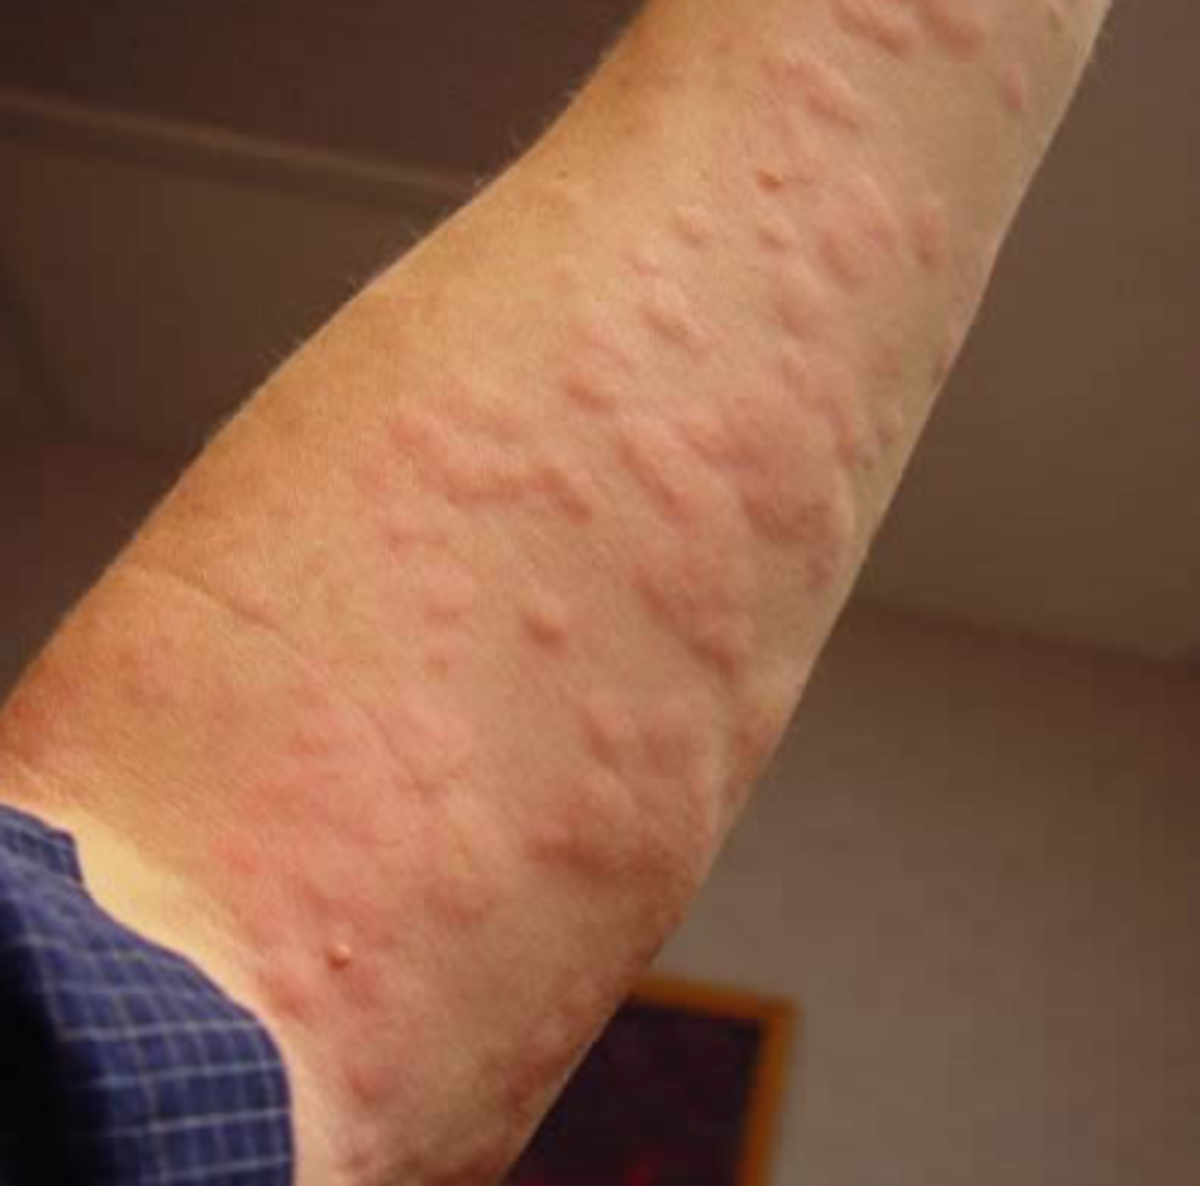 (Urticaria) Relief from Hives and Eczema Rashes In Under One Minute, Naturally